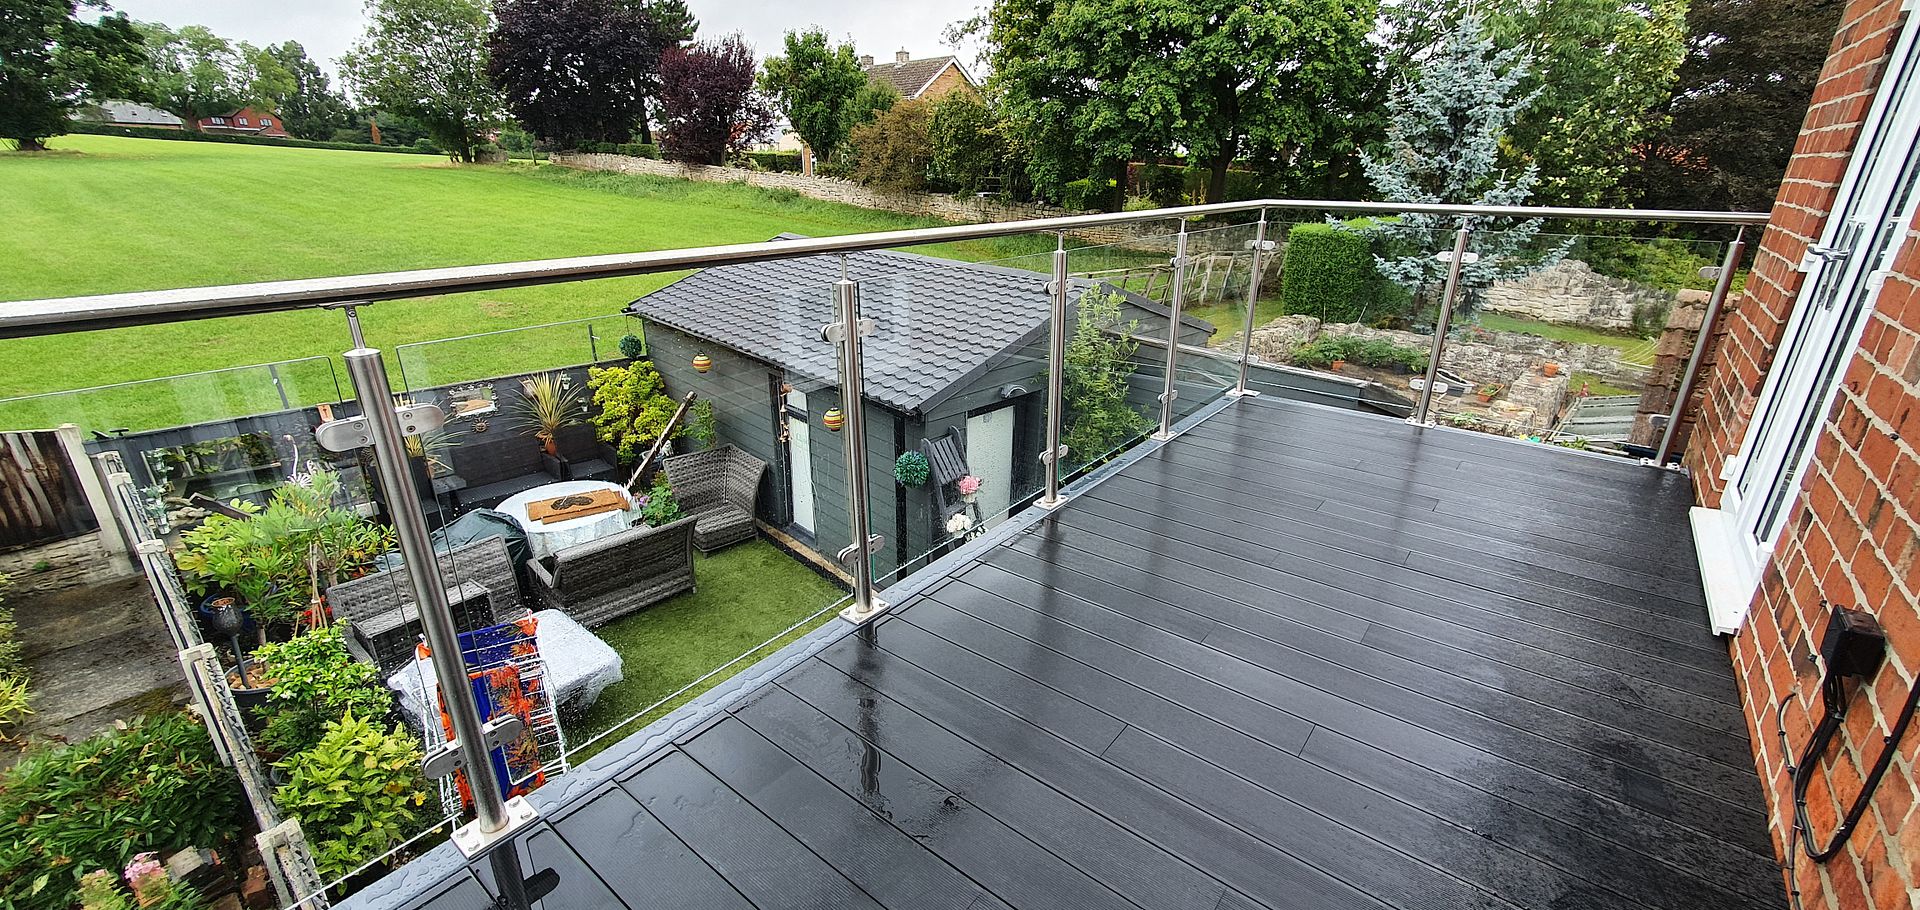 walk out balcony structure with glass balustrade